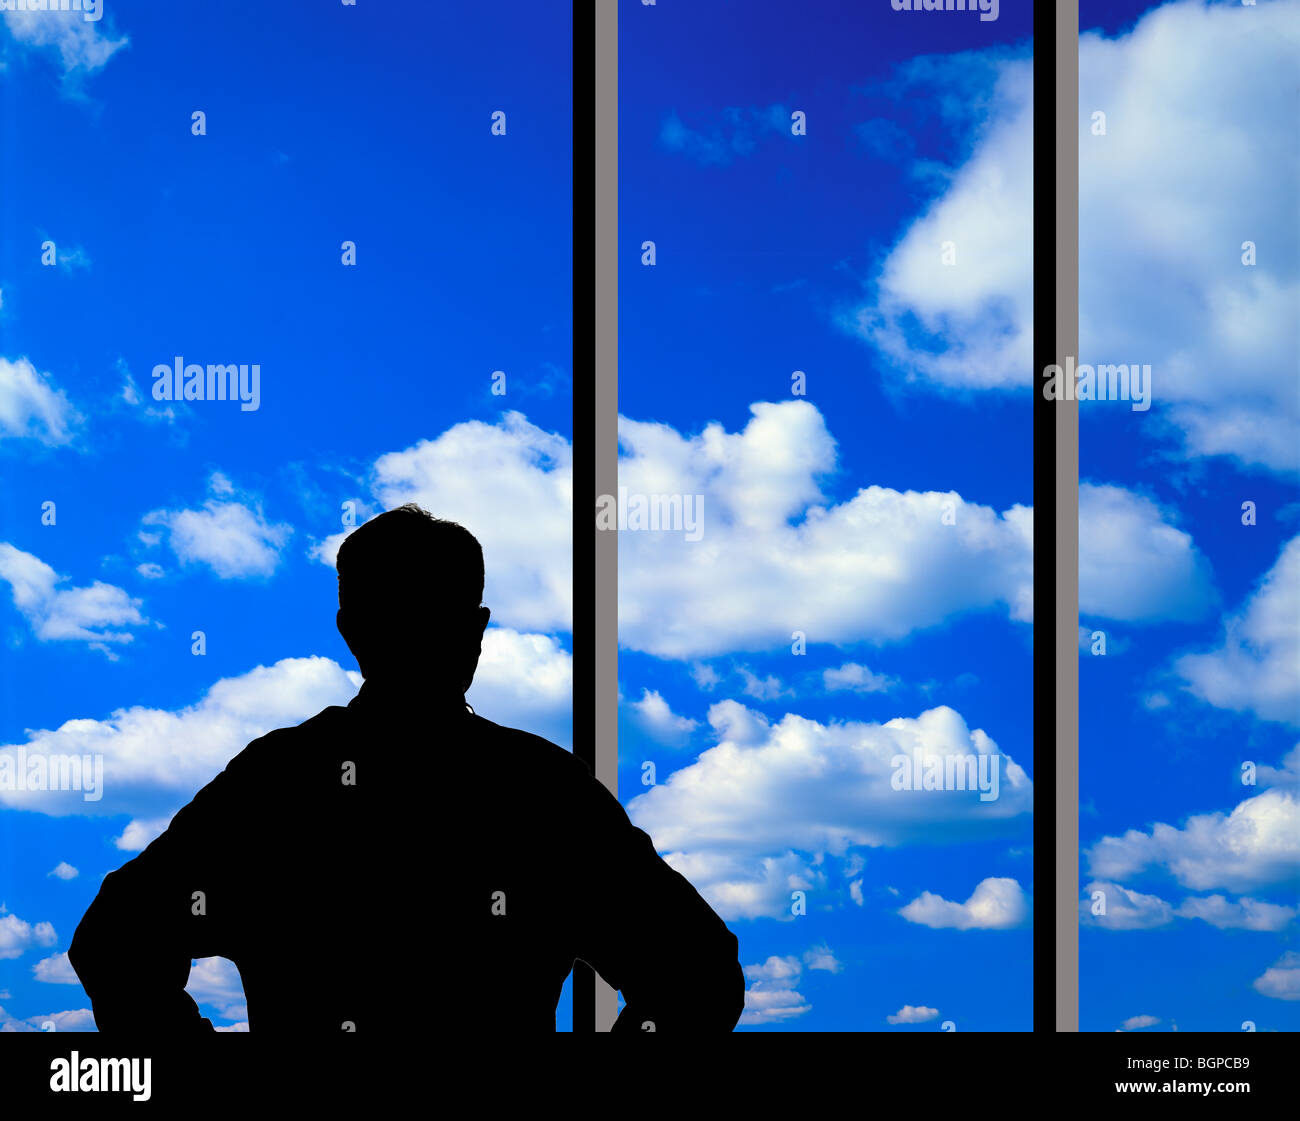 man looking at clouds through large glass window Stock Photo